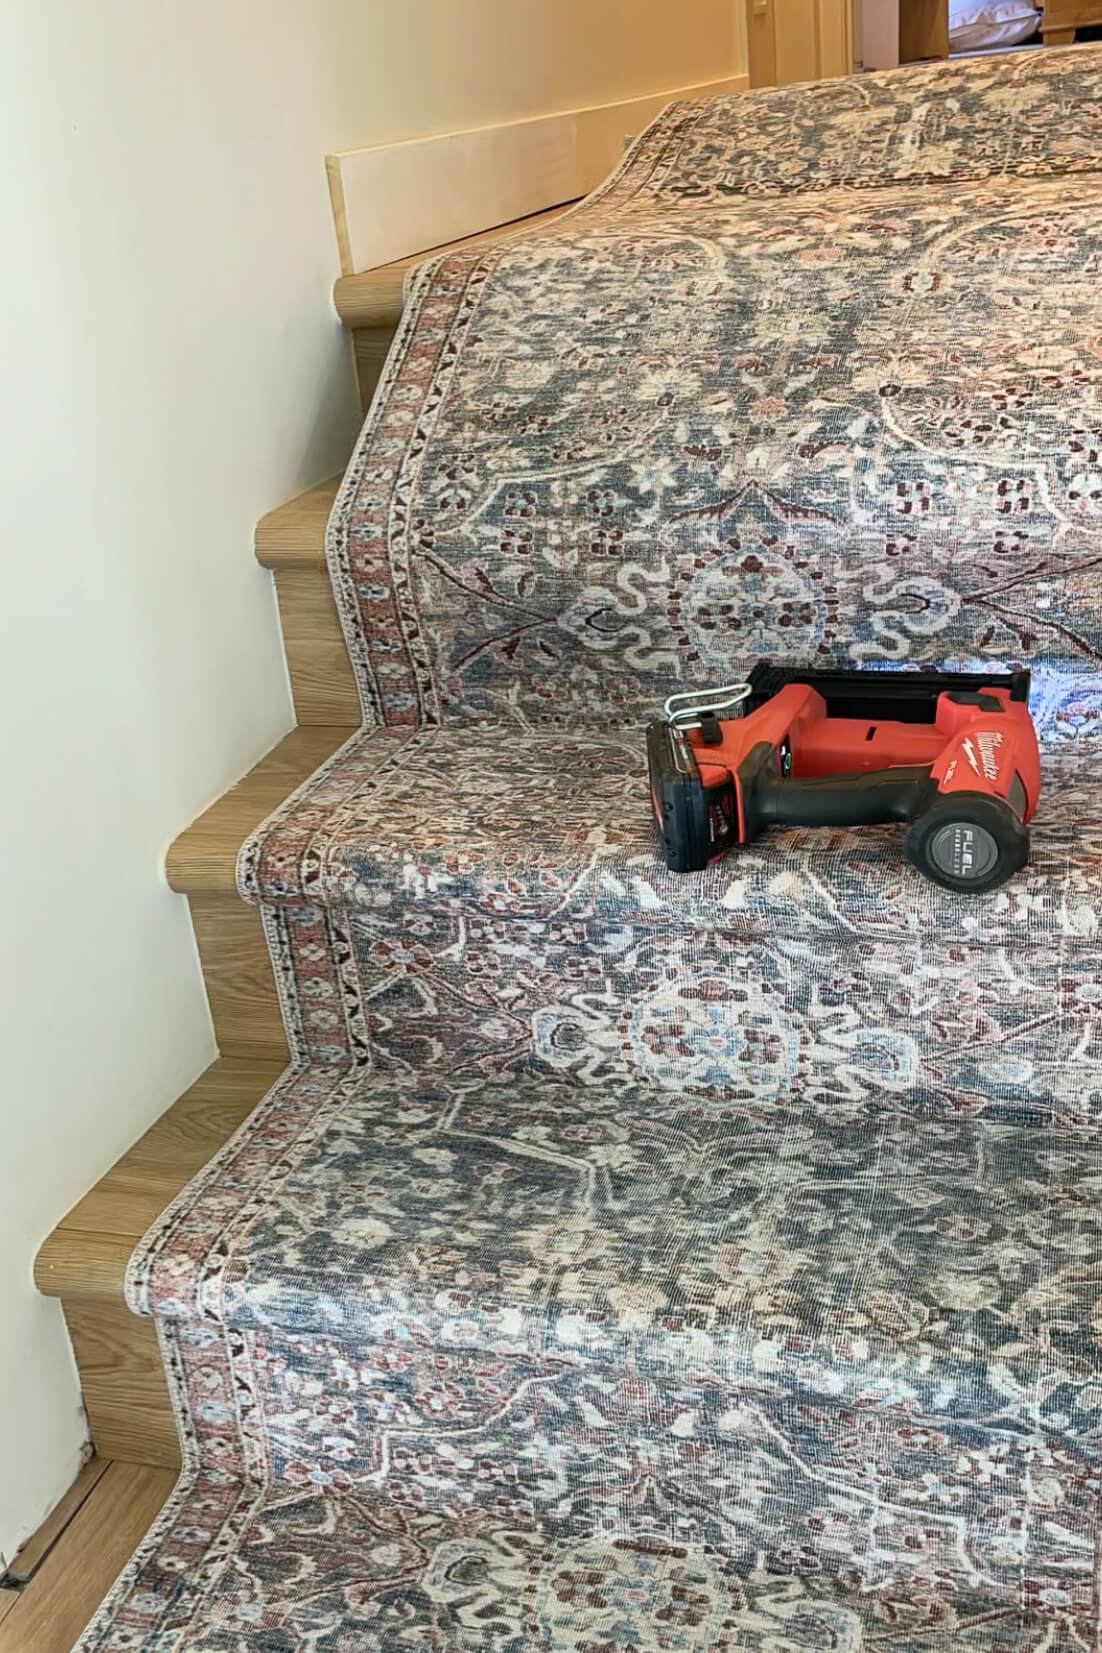 Stapling a stair runner to stairs.